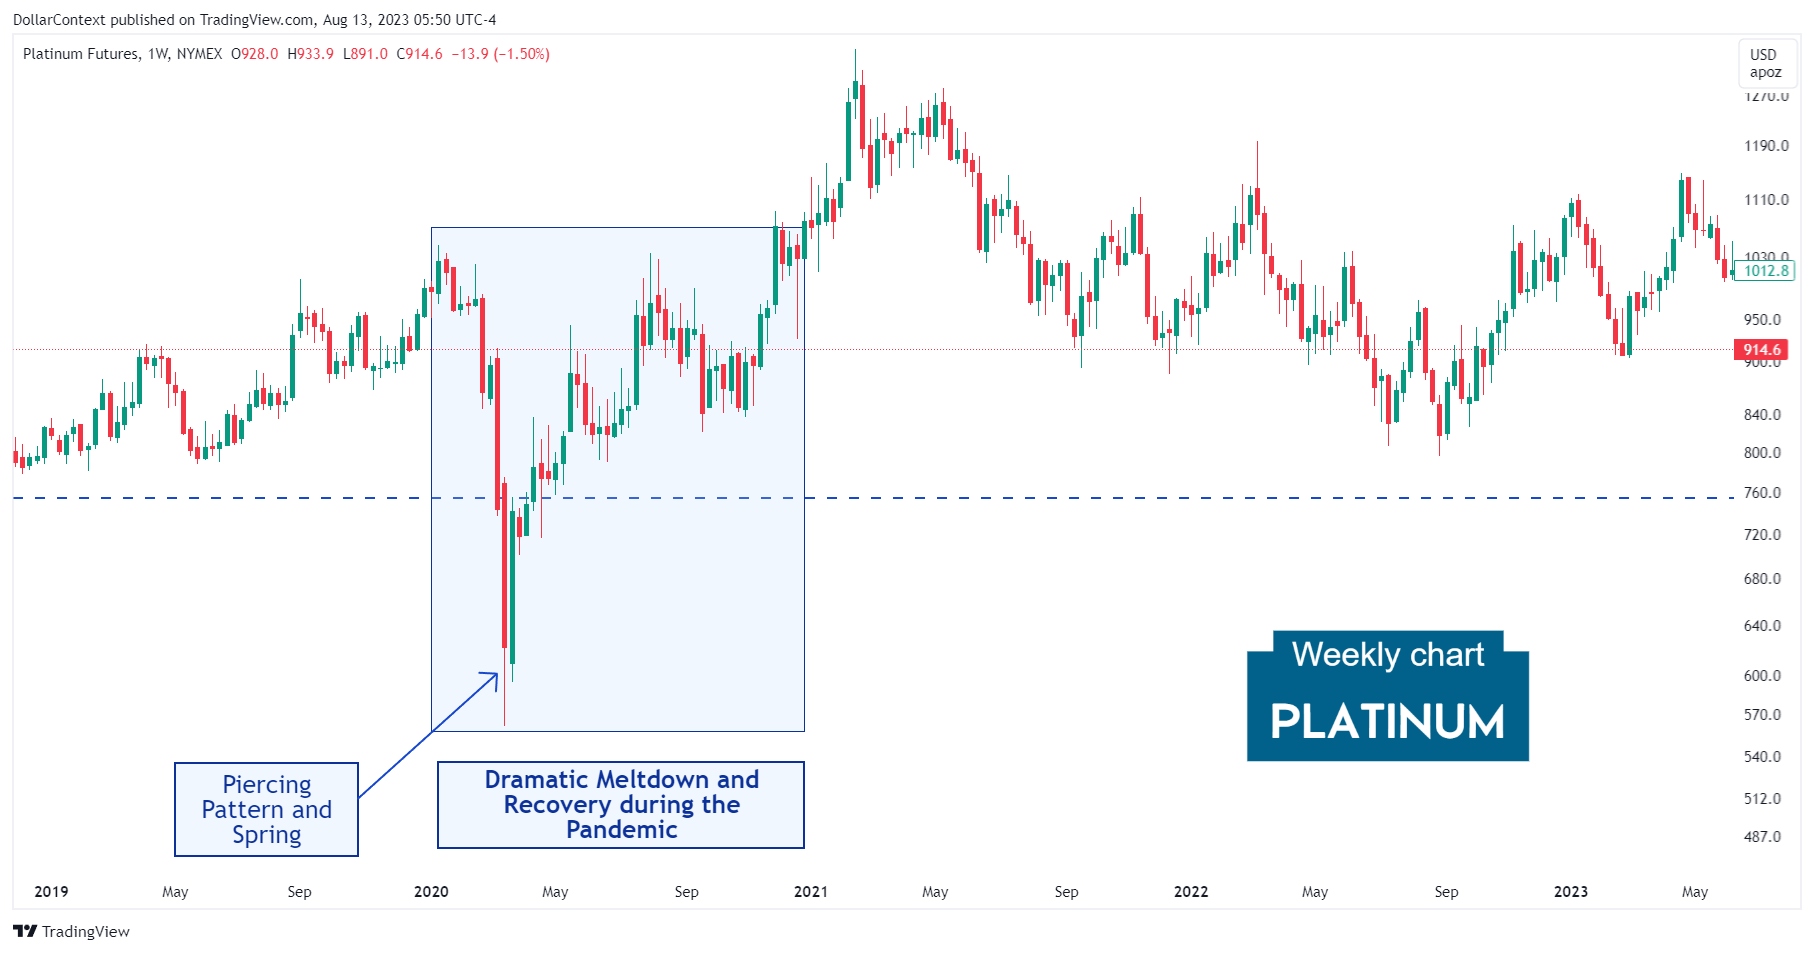 Platinum Futures: The Meltdown and Subsequent Recovery During the Pandemic